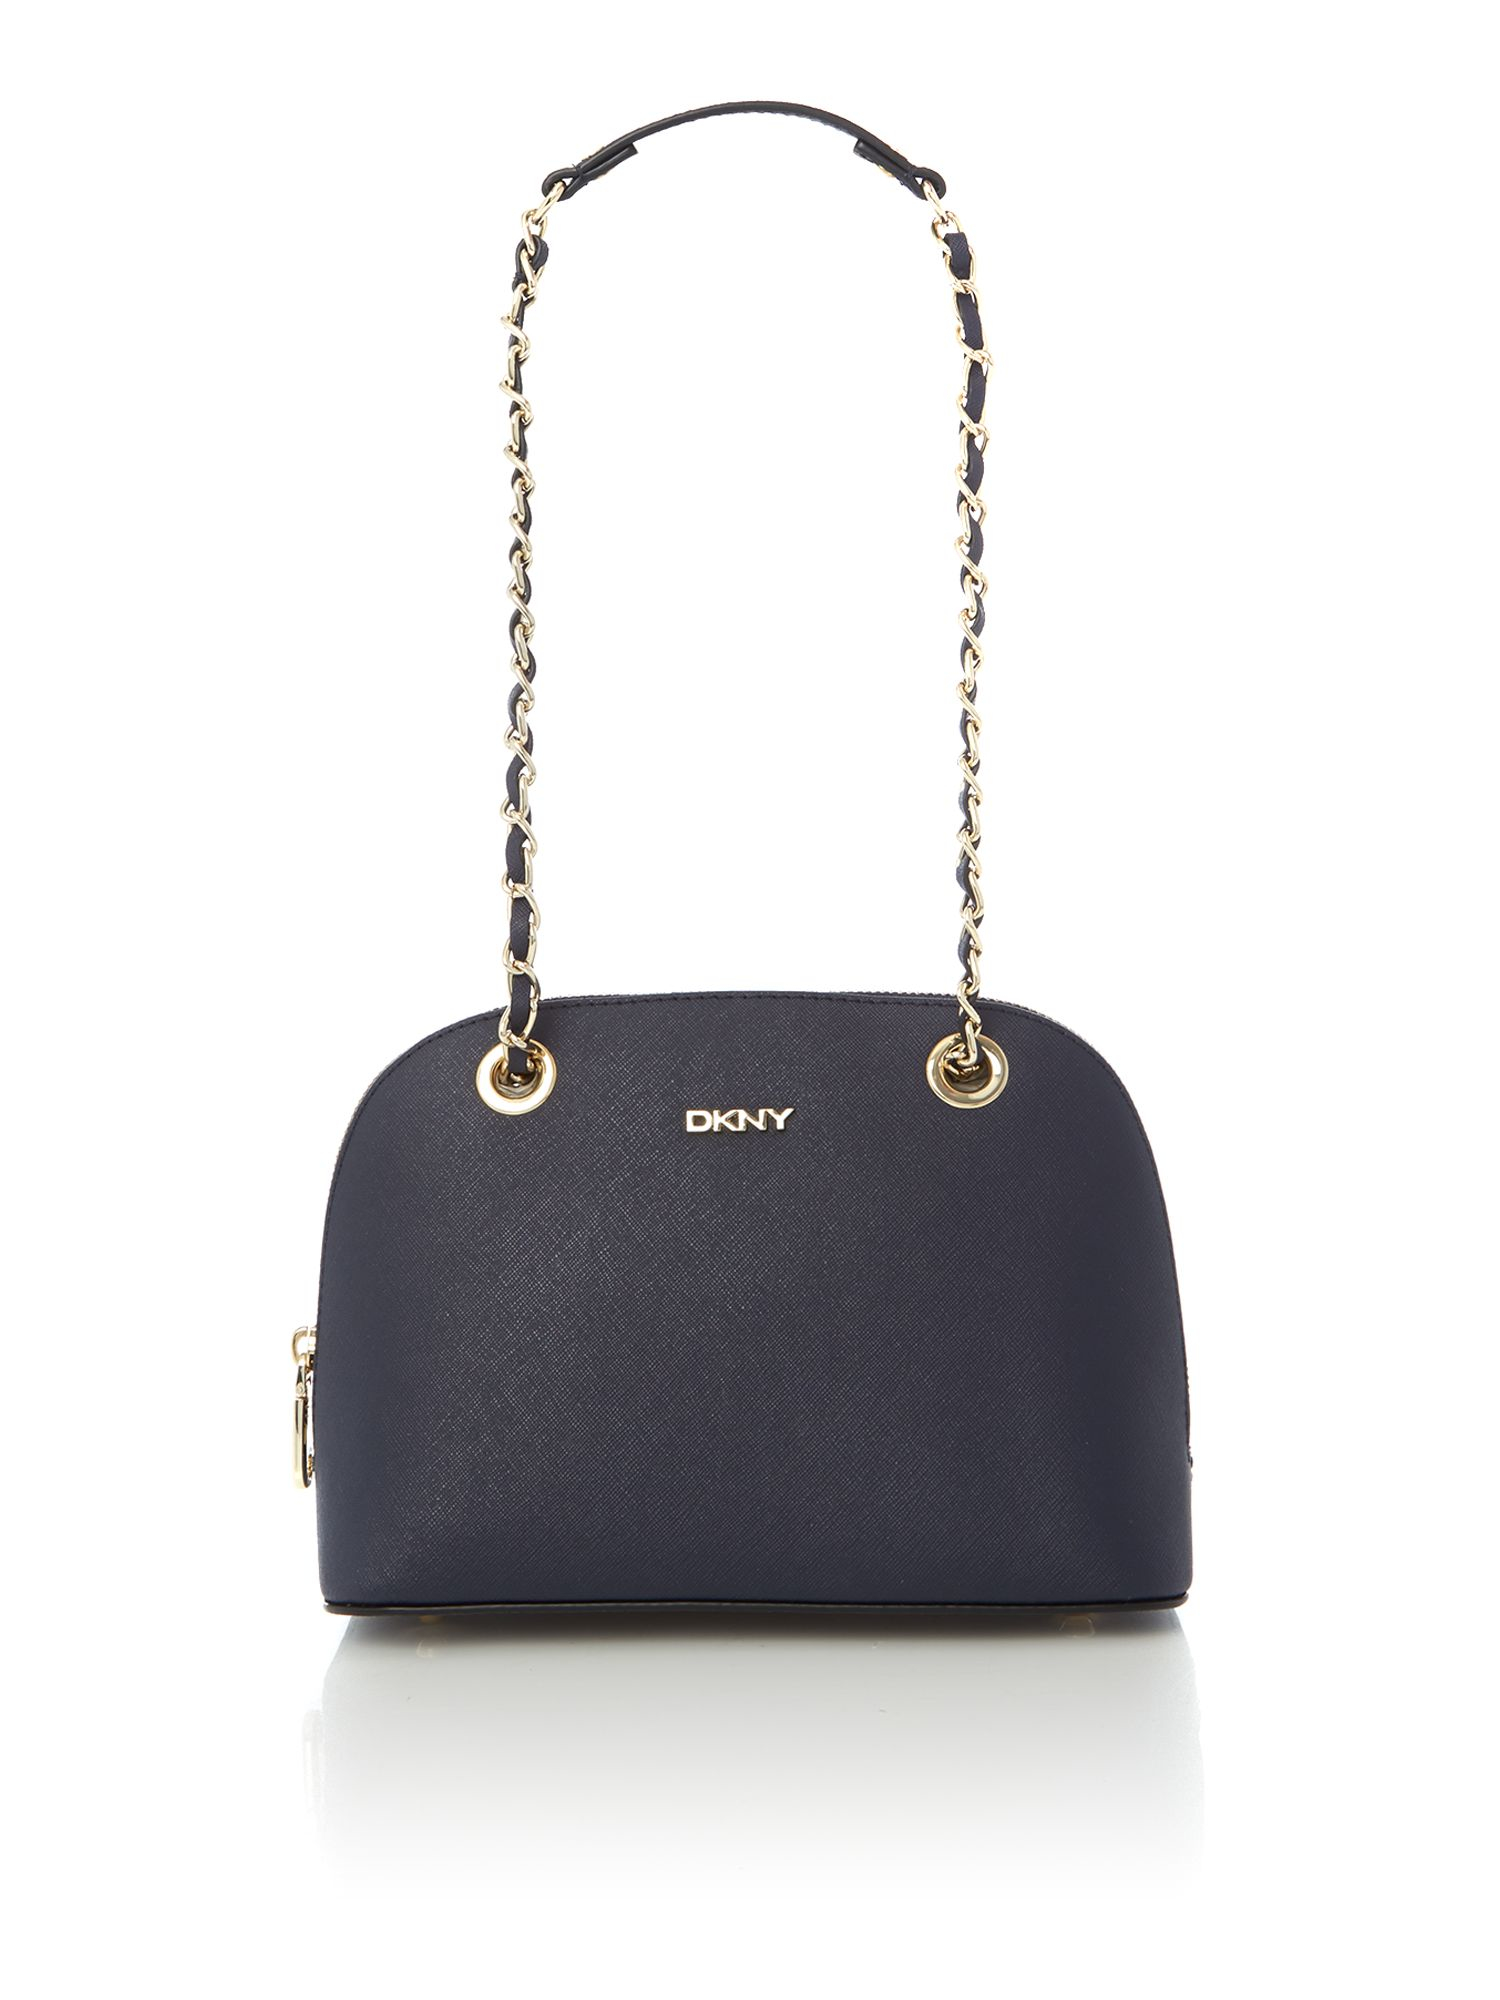 Dkny Saffiano Navy Small Rounded Cross Body Bag in Blue | Lyst